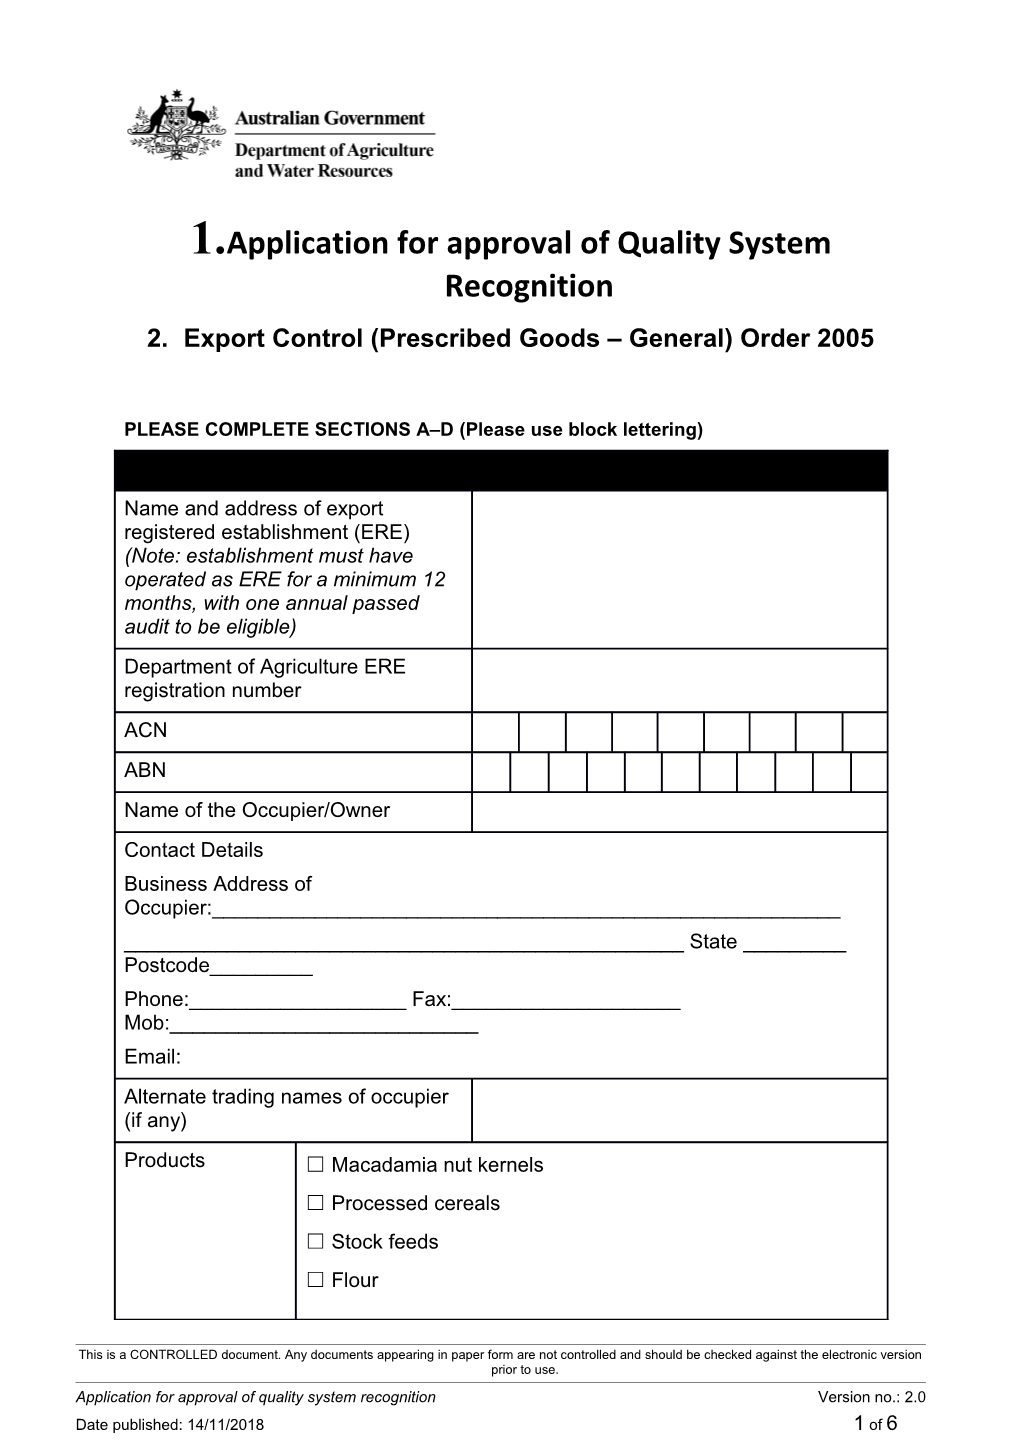 Application for Approval of Quality System Recognition